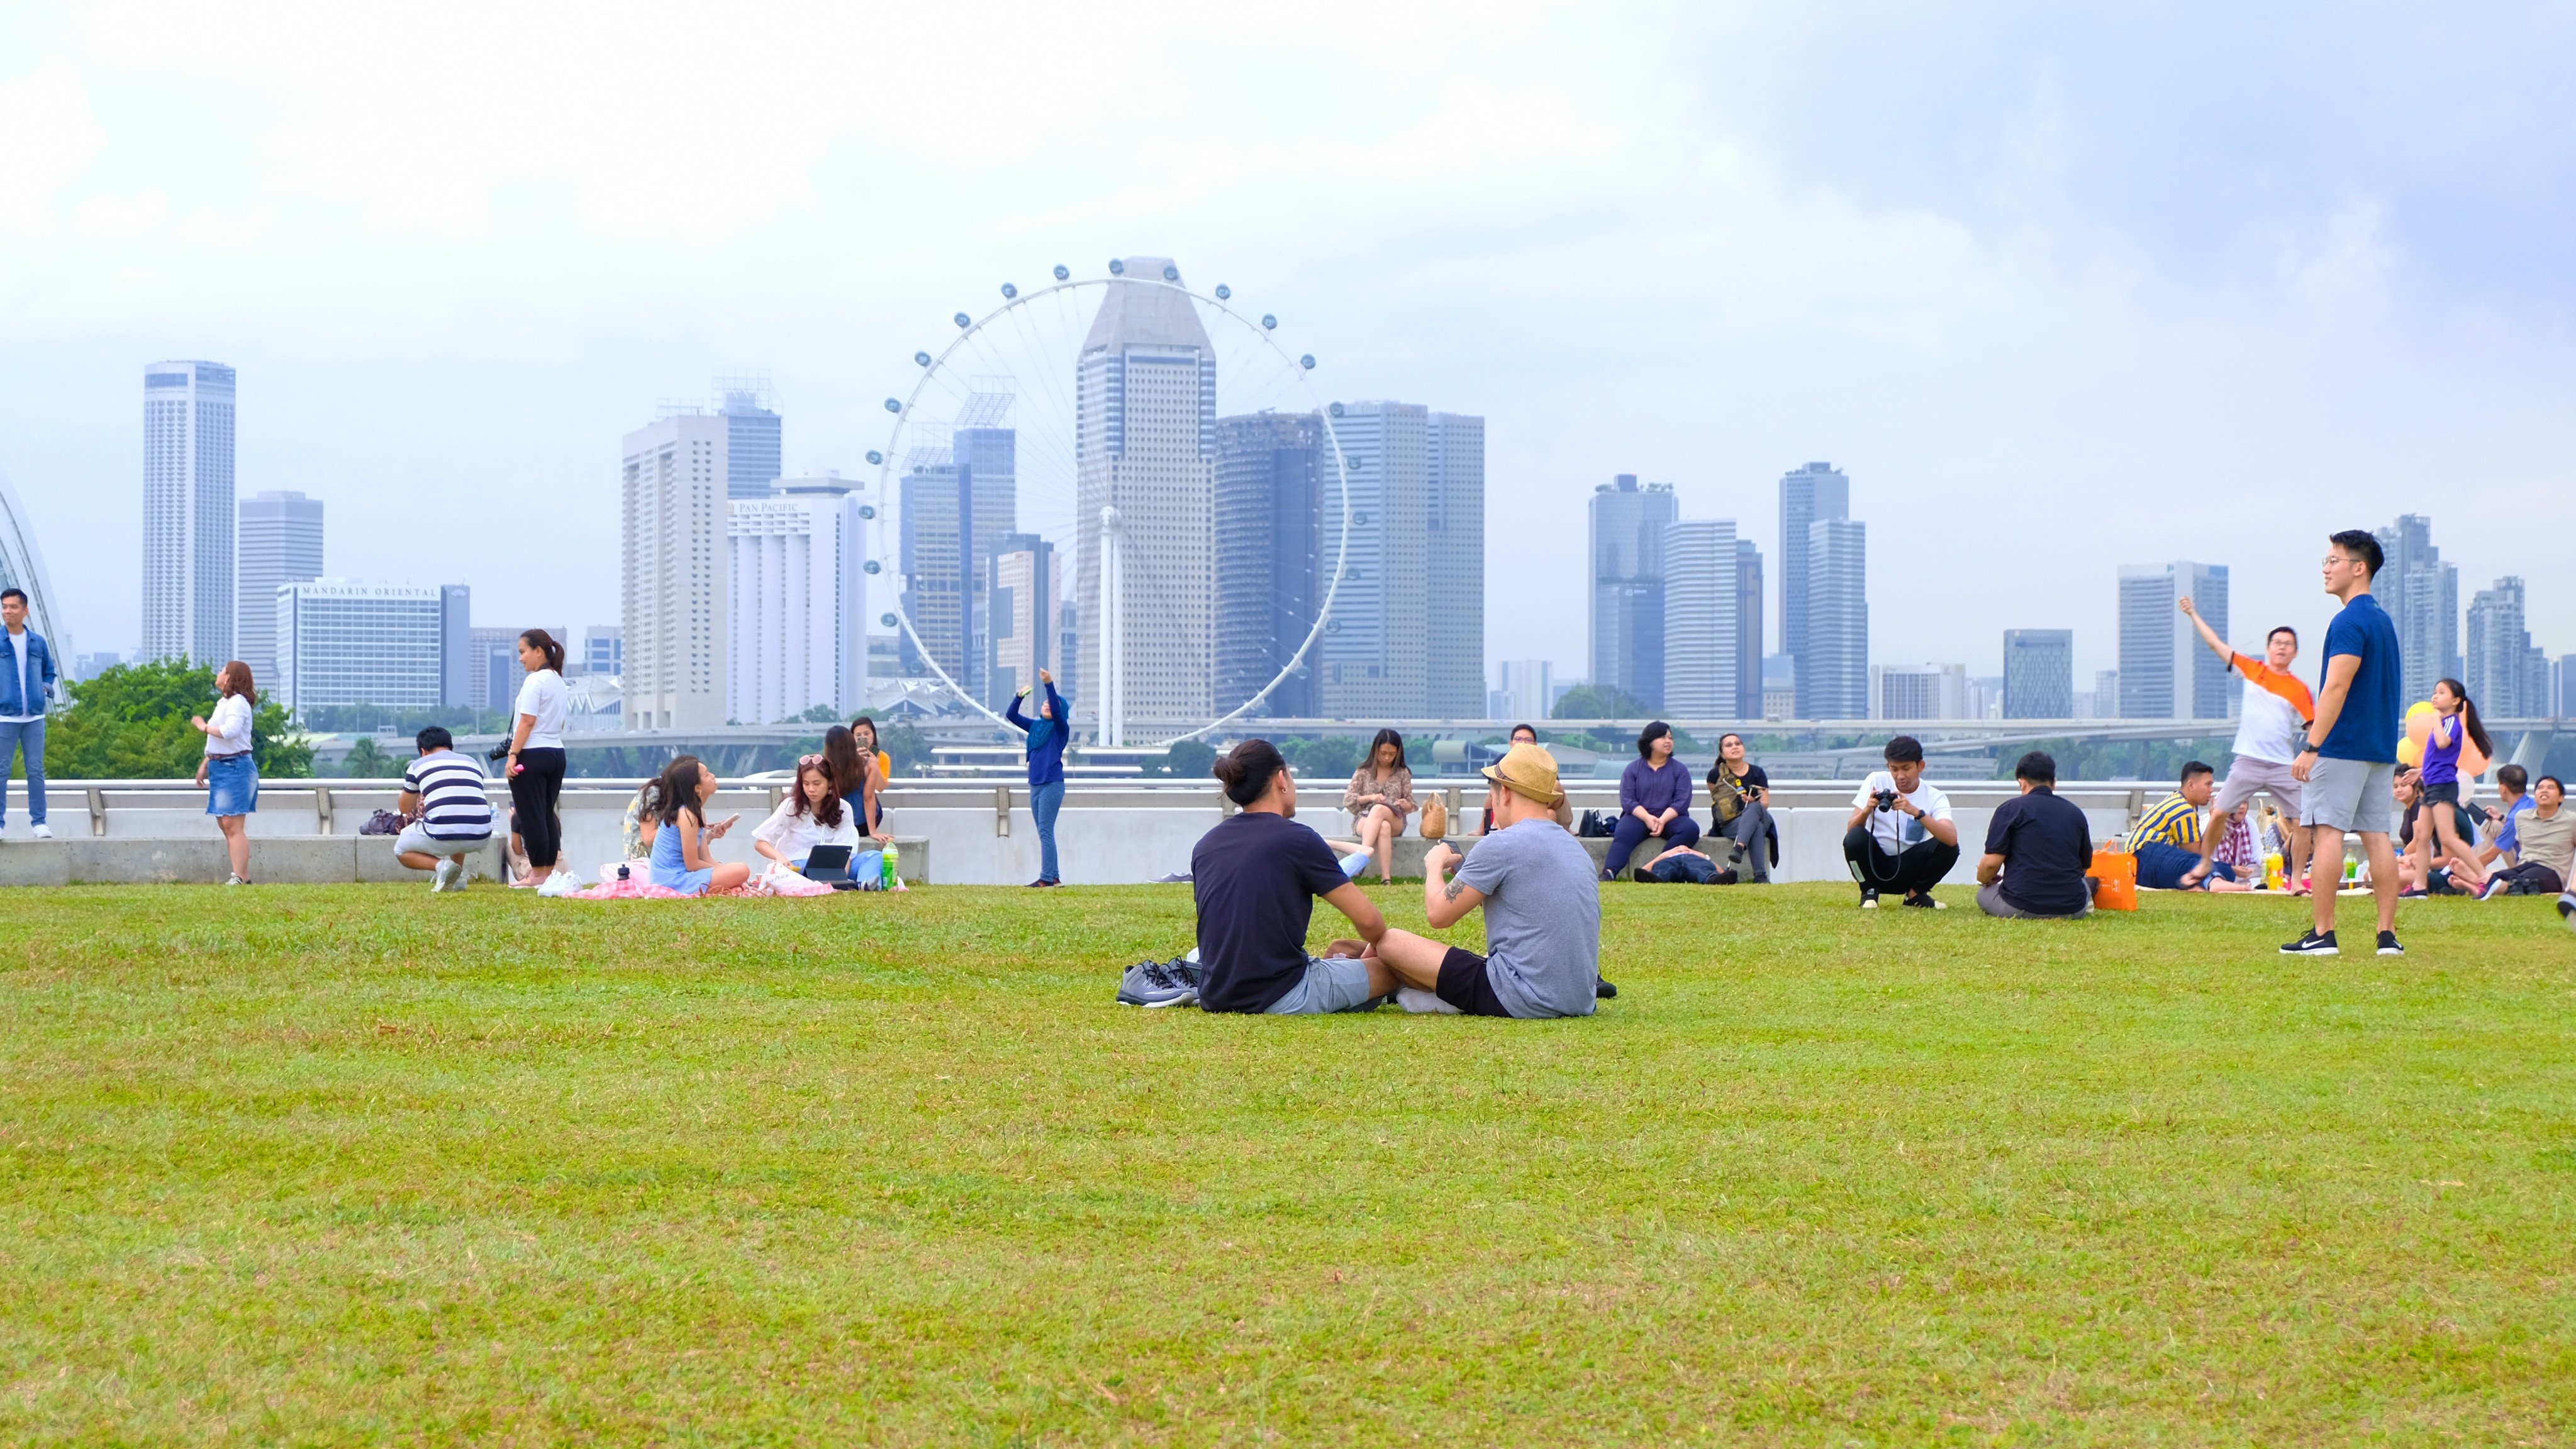 People in Singapore enjoy a day out at Marina Barrage. Photo: Shutterstock 